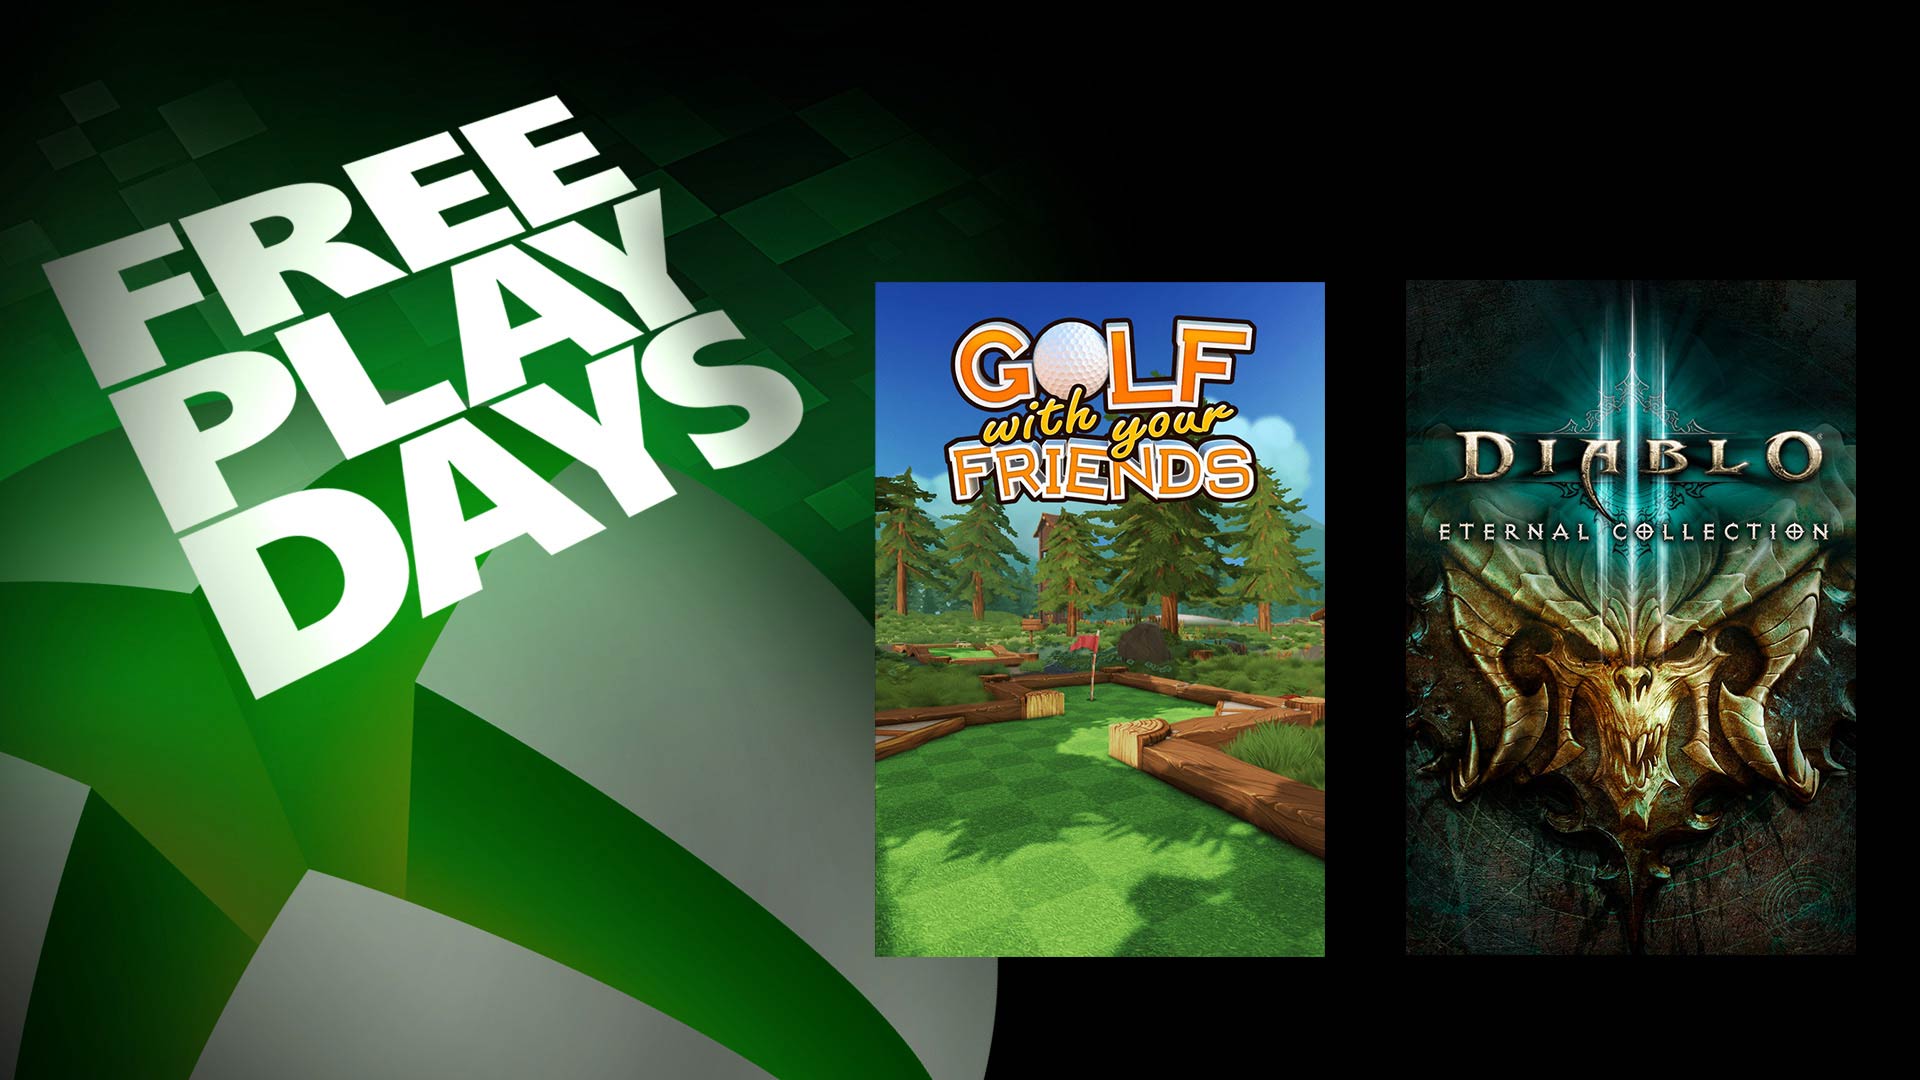 Diablo III: Eternal Collection and Golf With Your Friends free to play on Xbox this weekend